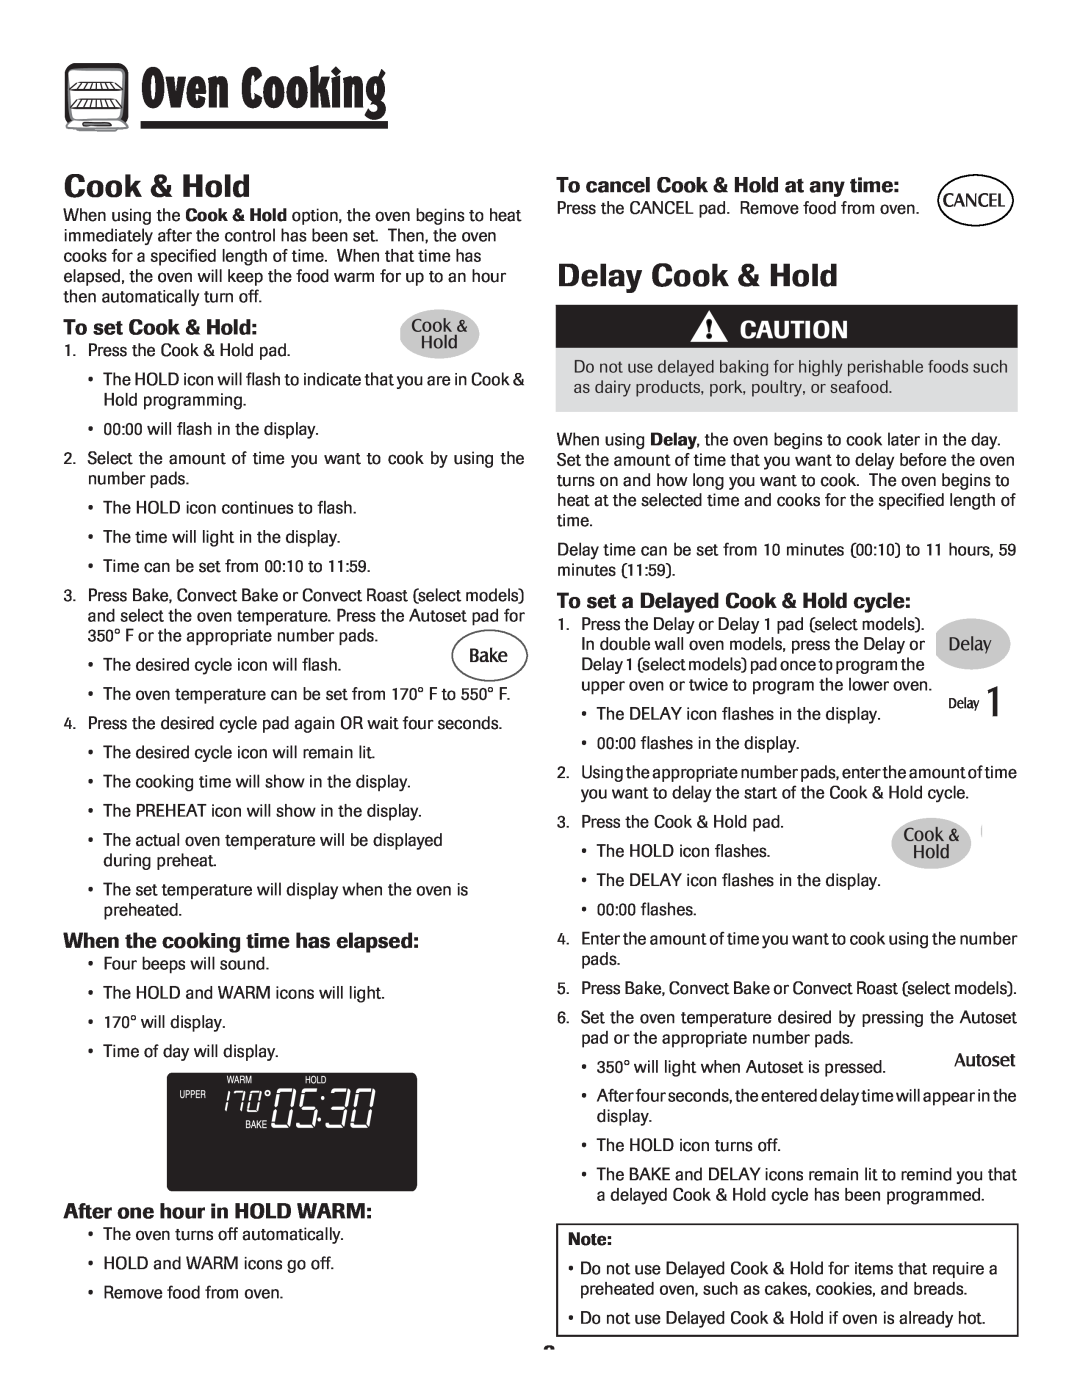 Maytag MEW6630DDW warranty Delay Cook & Hold, To set Cook & Hold, When the cooking time has elapsed, Oven Cooking 